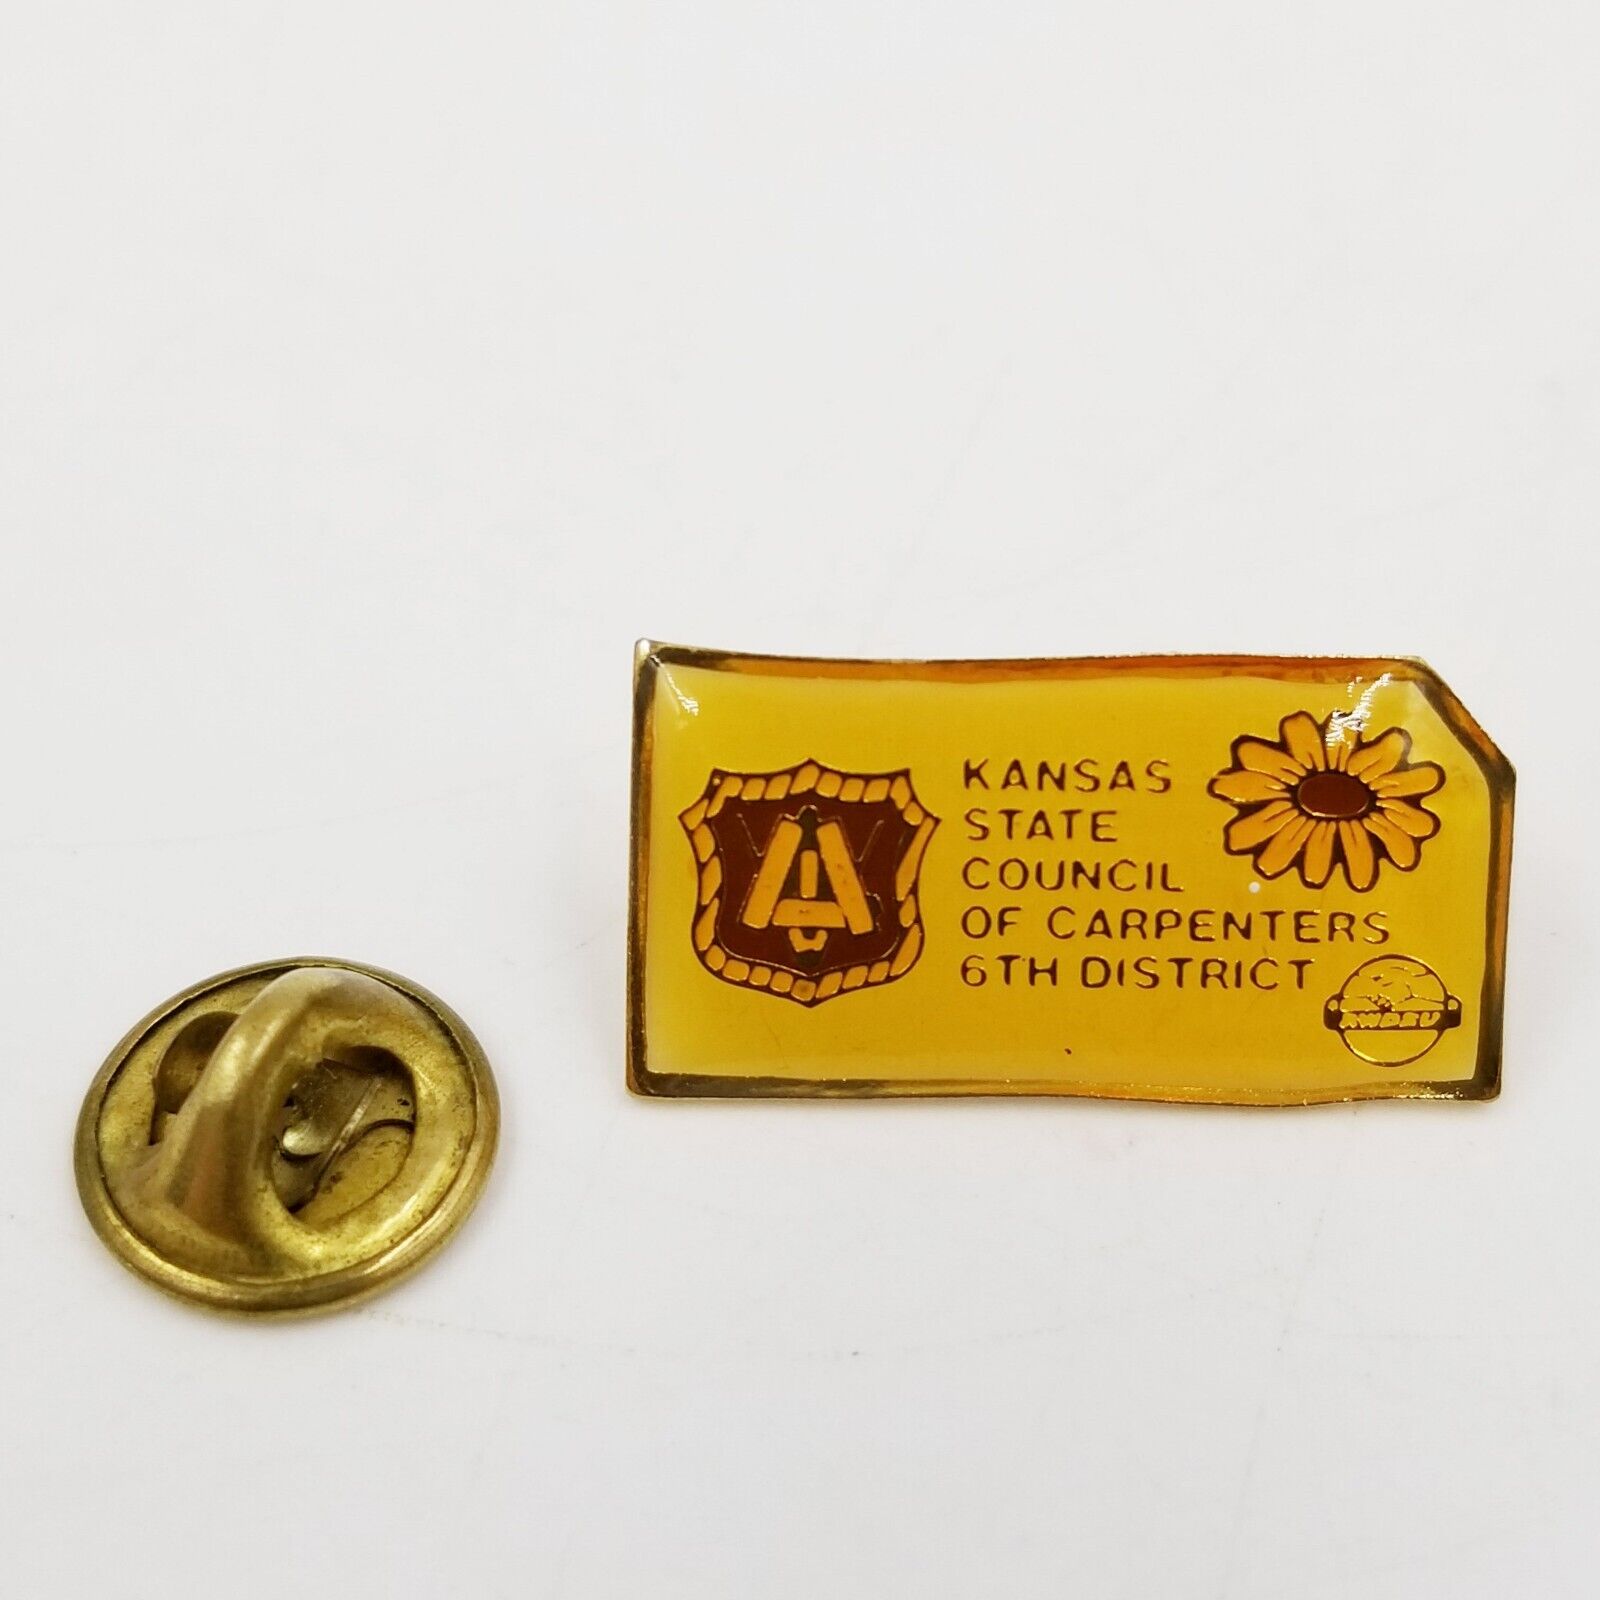 Vintage Kansas State Council of Carpenters 6th District Pin